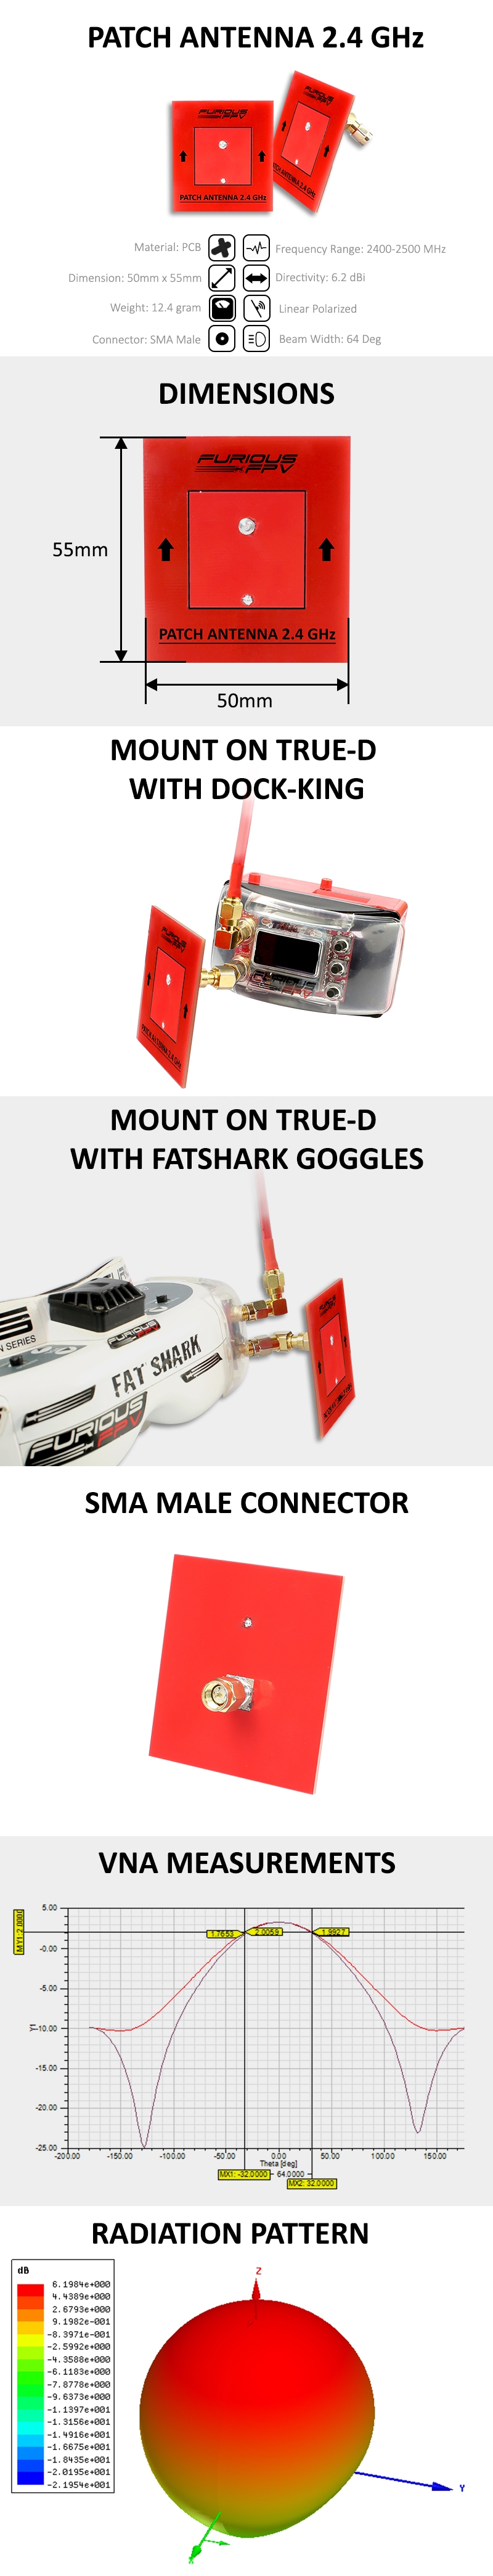 FuriousFPV 2.4GHz 6.2dBi Linear Polarized Patch FPV Antenna SMA Male for FPV Racing RC Drone